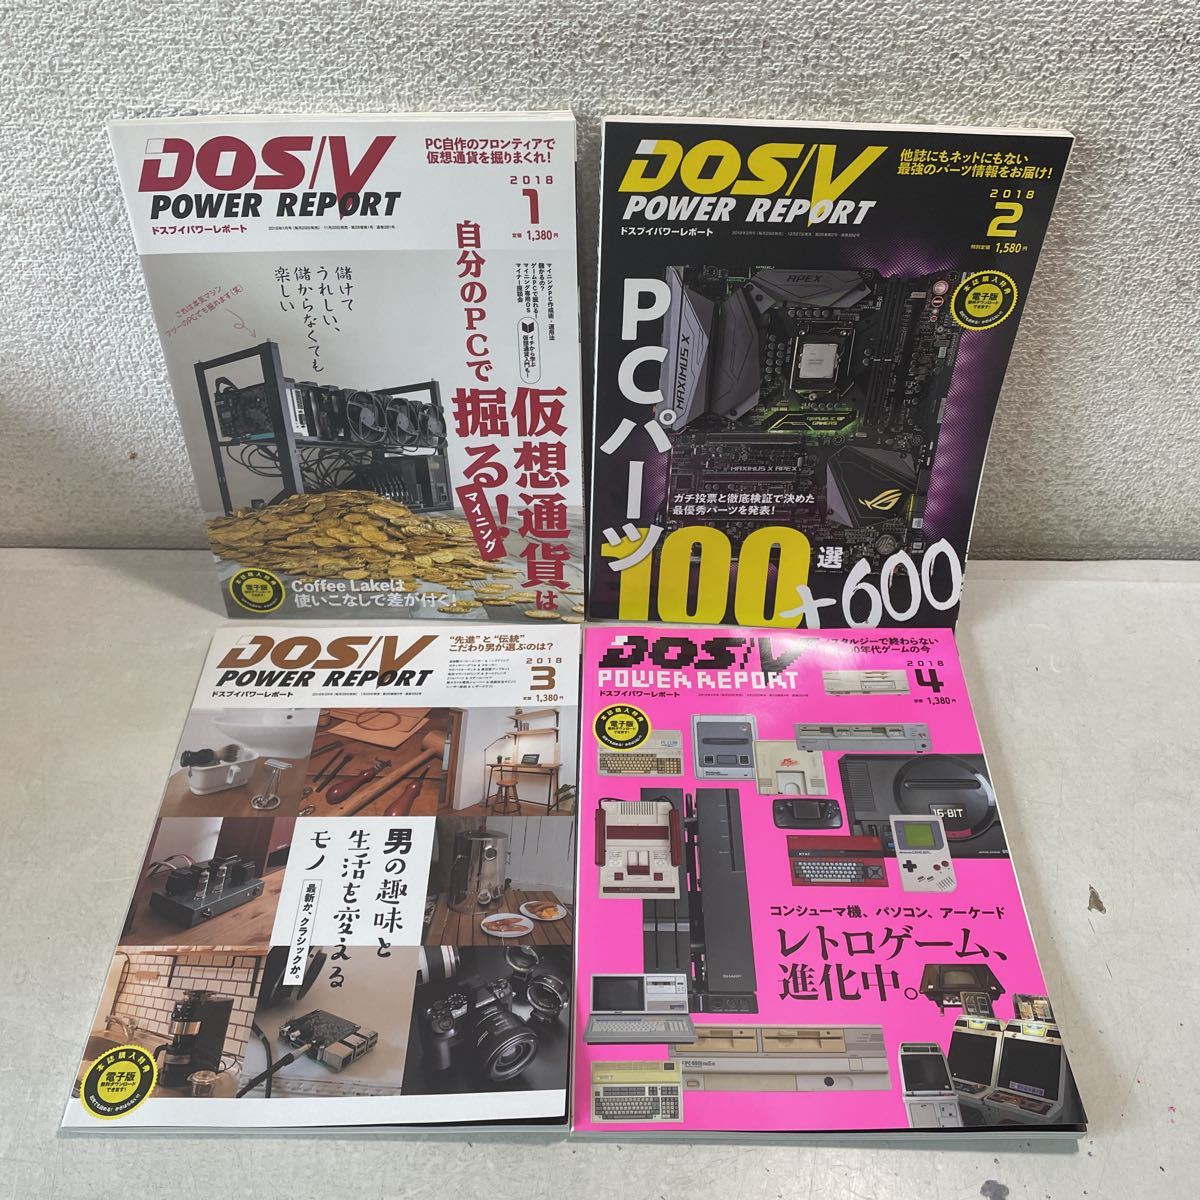 230210★U00★DOS/V POWER REPORT ドスブイパワーレポート 2018年1月号〜12月号 揃い12冊セット★パソコン誌_画像4